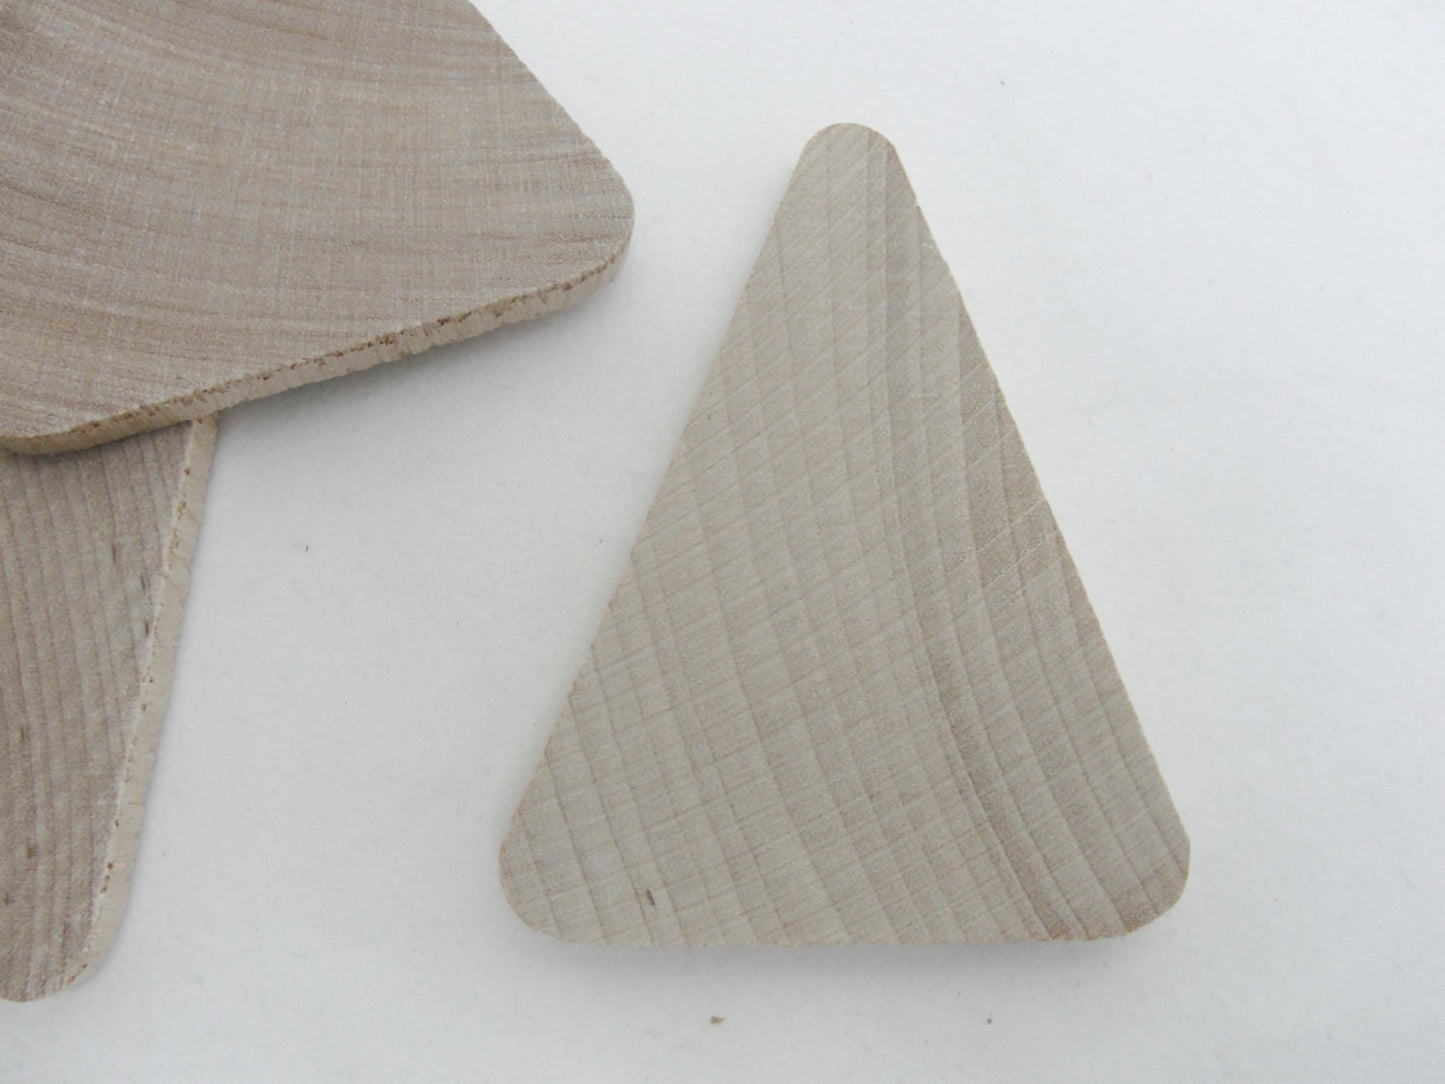 Wooden Triangle 2" wide x 2 1/2" tall x 1/4" thick unfinished DIY set of 6 - Wood parts - Craft Supply House